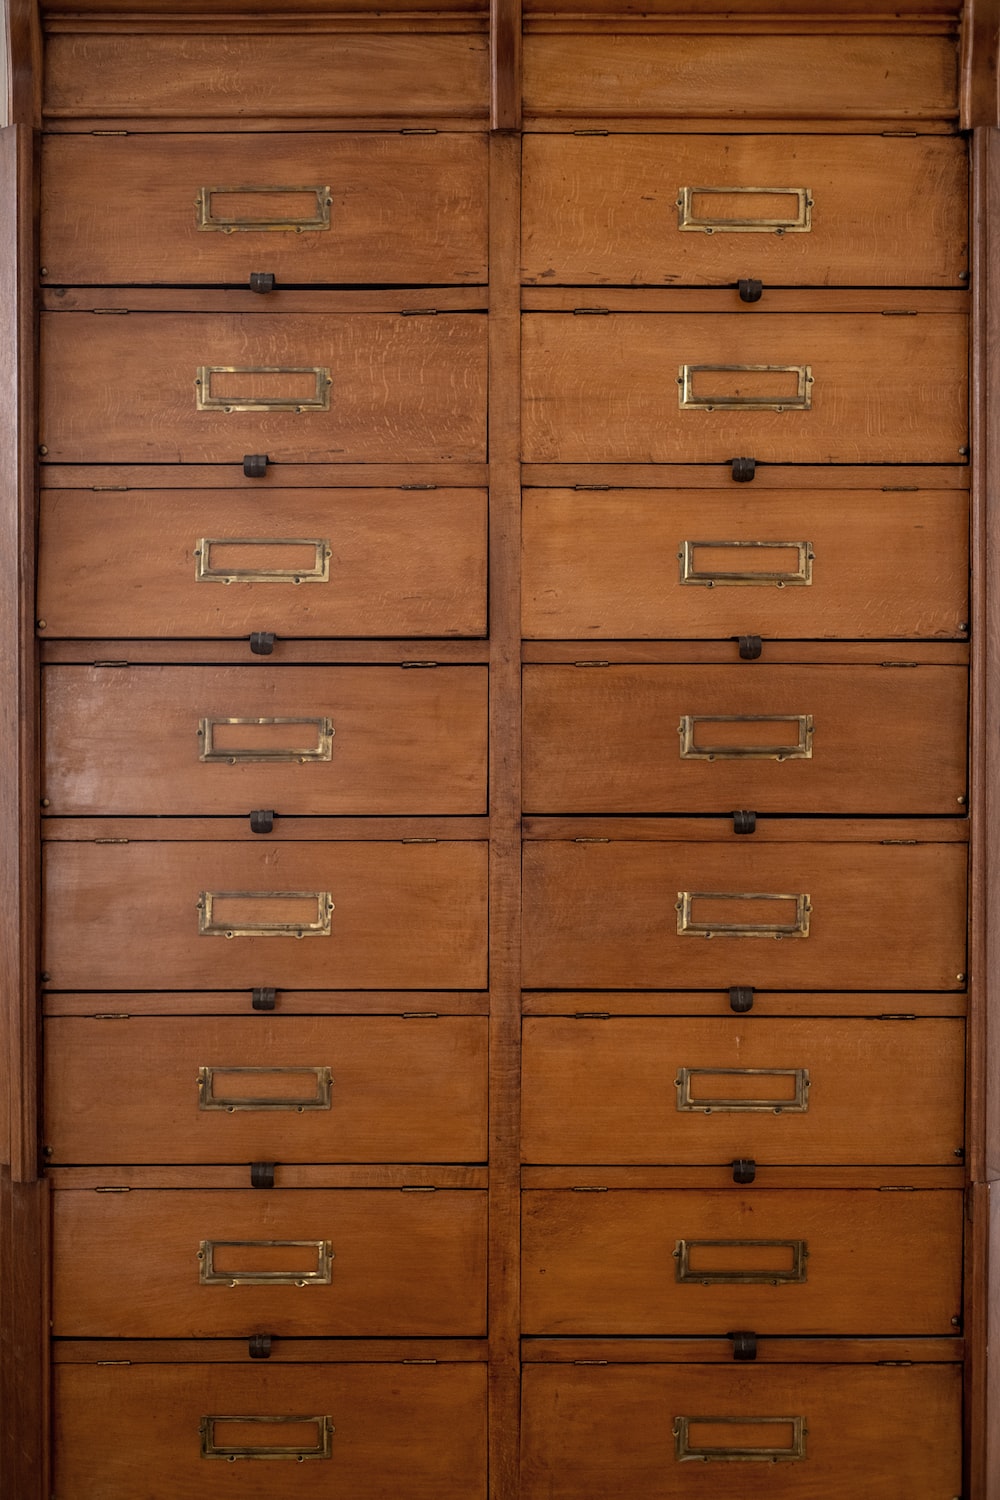 How do you store papers without a file cabinet?